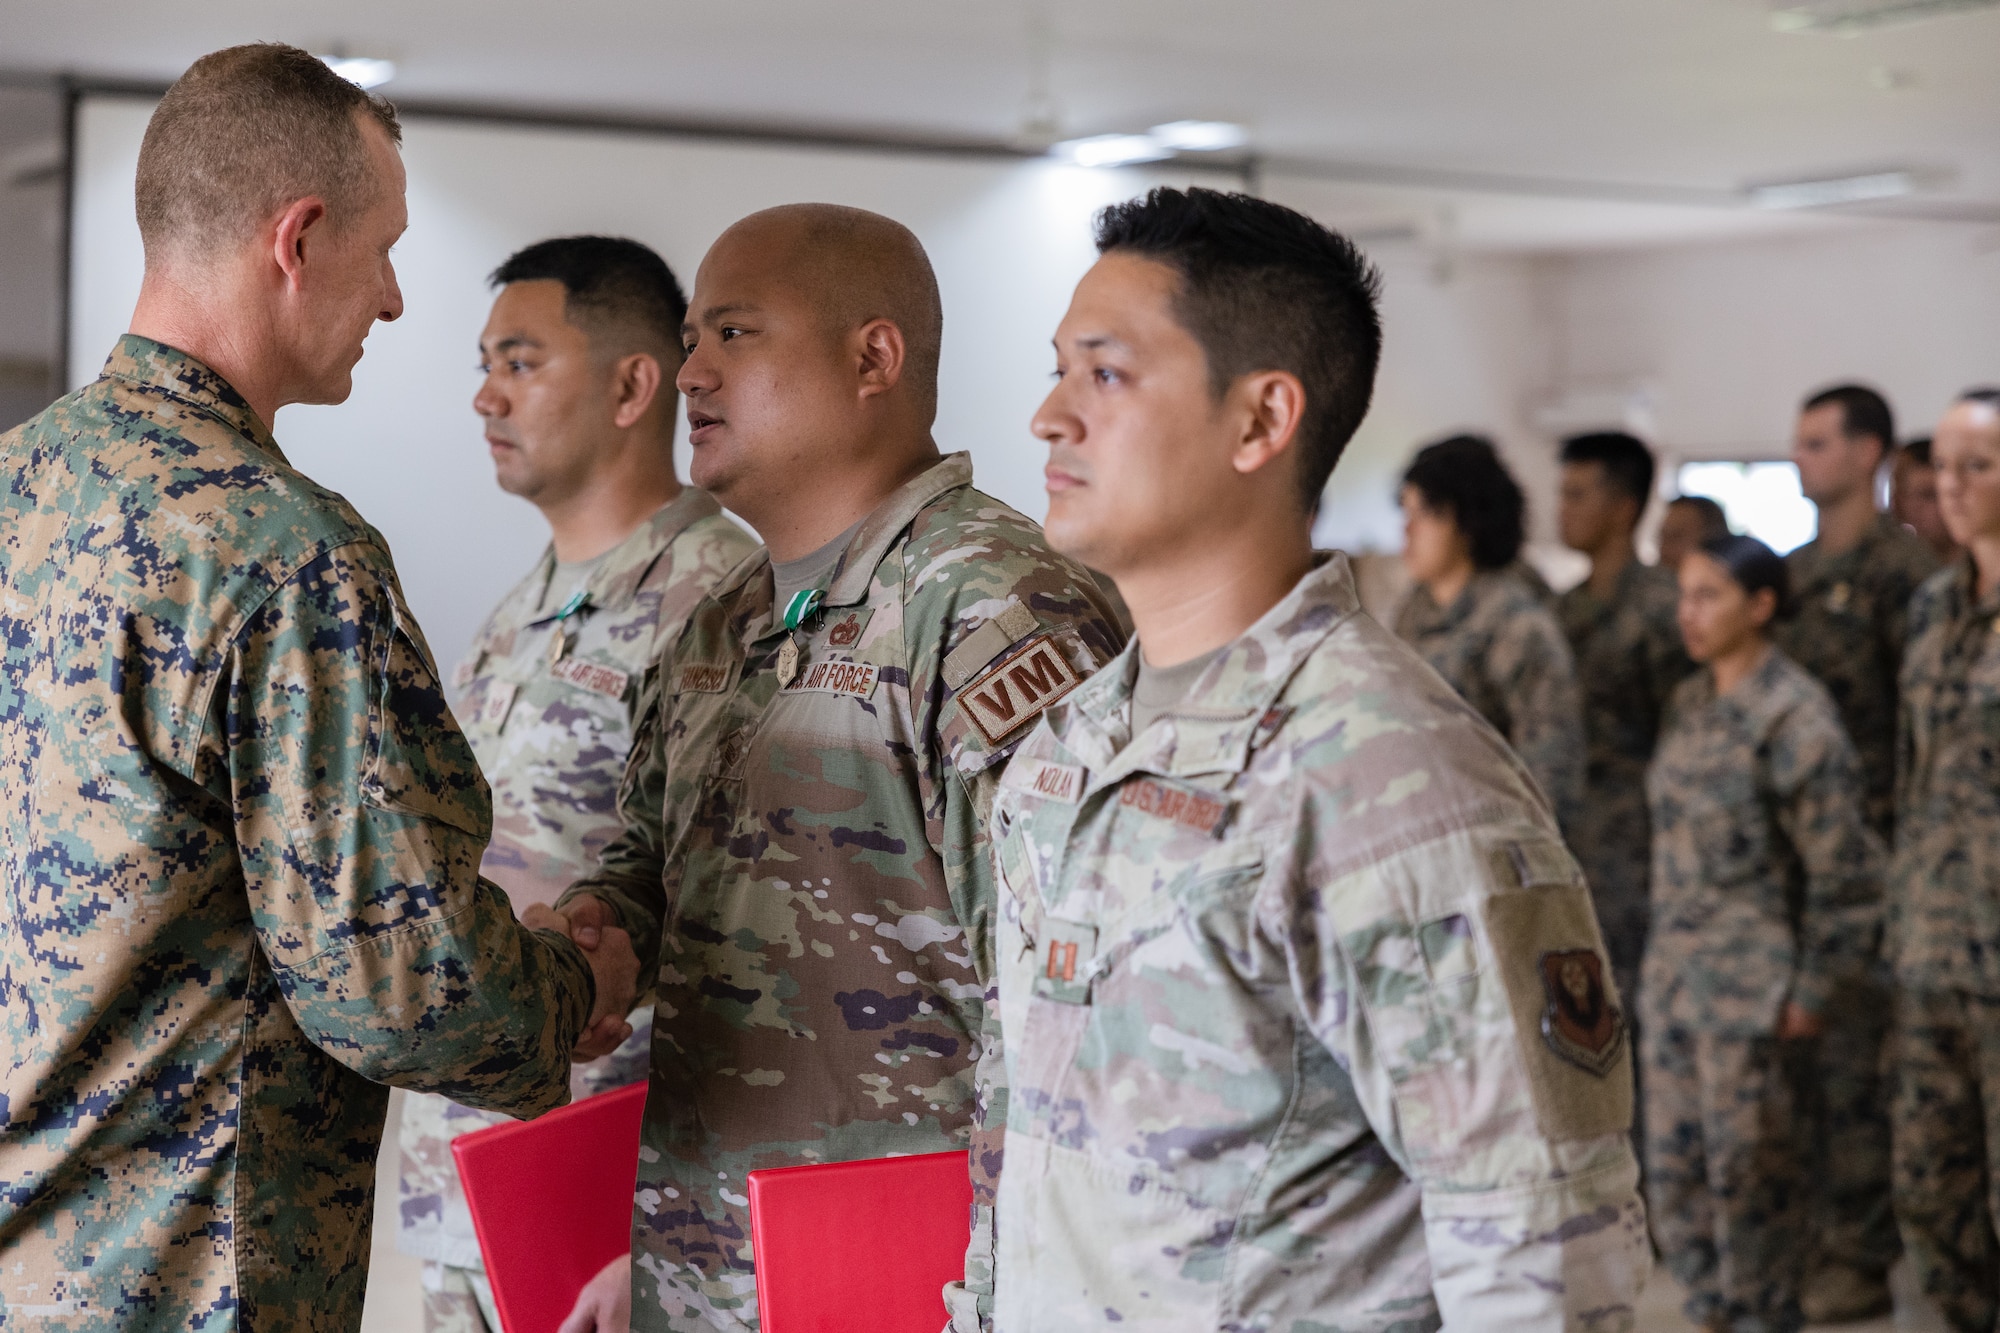 U.S. Air Force Tech. Sgt. Cesar Salilican, Master Sgt. Ramchand Francisco, and Capt. Timothy Nolan, Tagalog interpreters attached to the 11th Marine Expeditionary Unit, are awarded the Navy and Marine Corps Commendation Medal by U.S. Marine Corps Col. Thomas Siverts, 11th Marine Expeditionary Unit commanding officer, at Camp Rudolfo Punsalang, Palawan, Philippines, Oct. 14, 2022. (U.S. Marine Corps photo by Sgt. Dana Beesley)